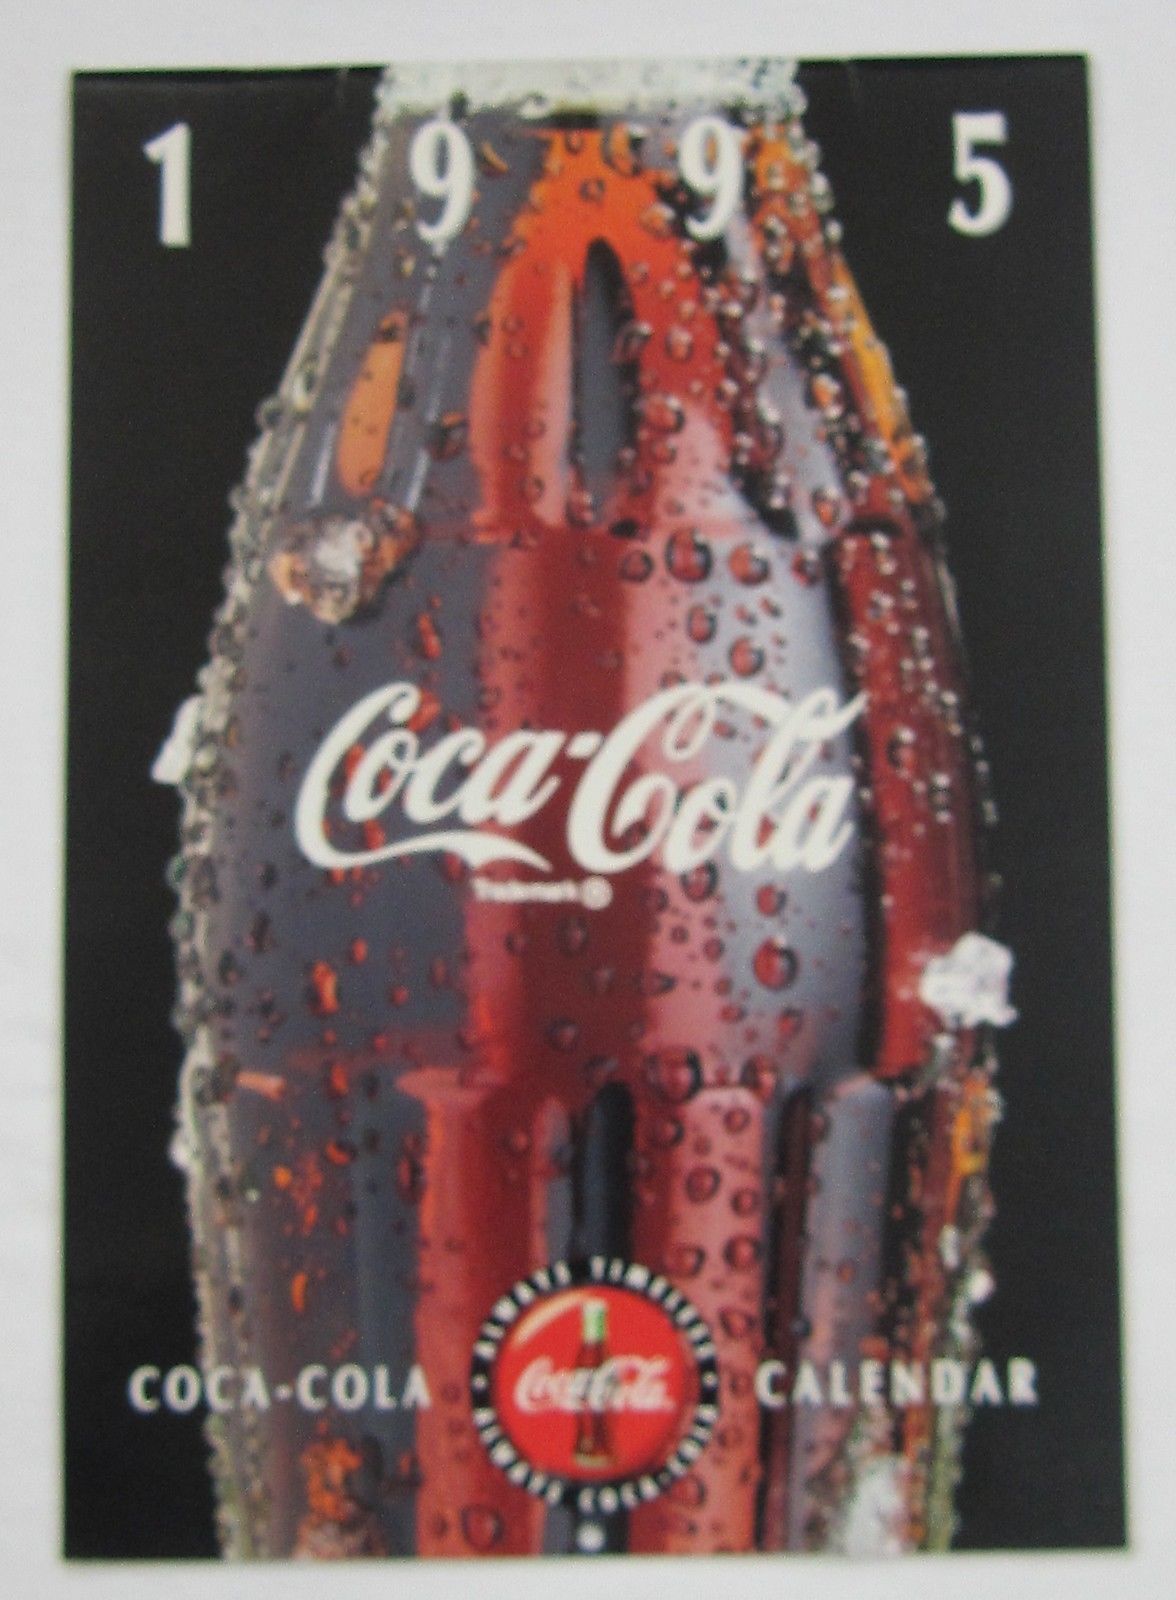 Primary image for Coca-Cola 1995 Calendar - NEW  FREE SHIPPING